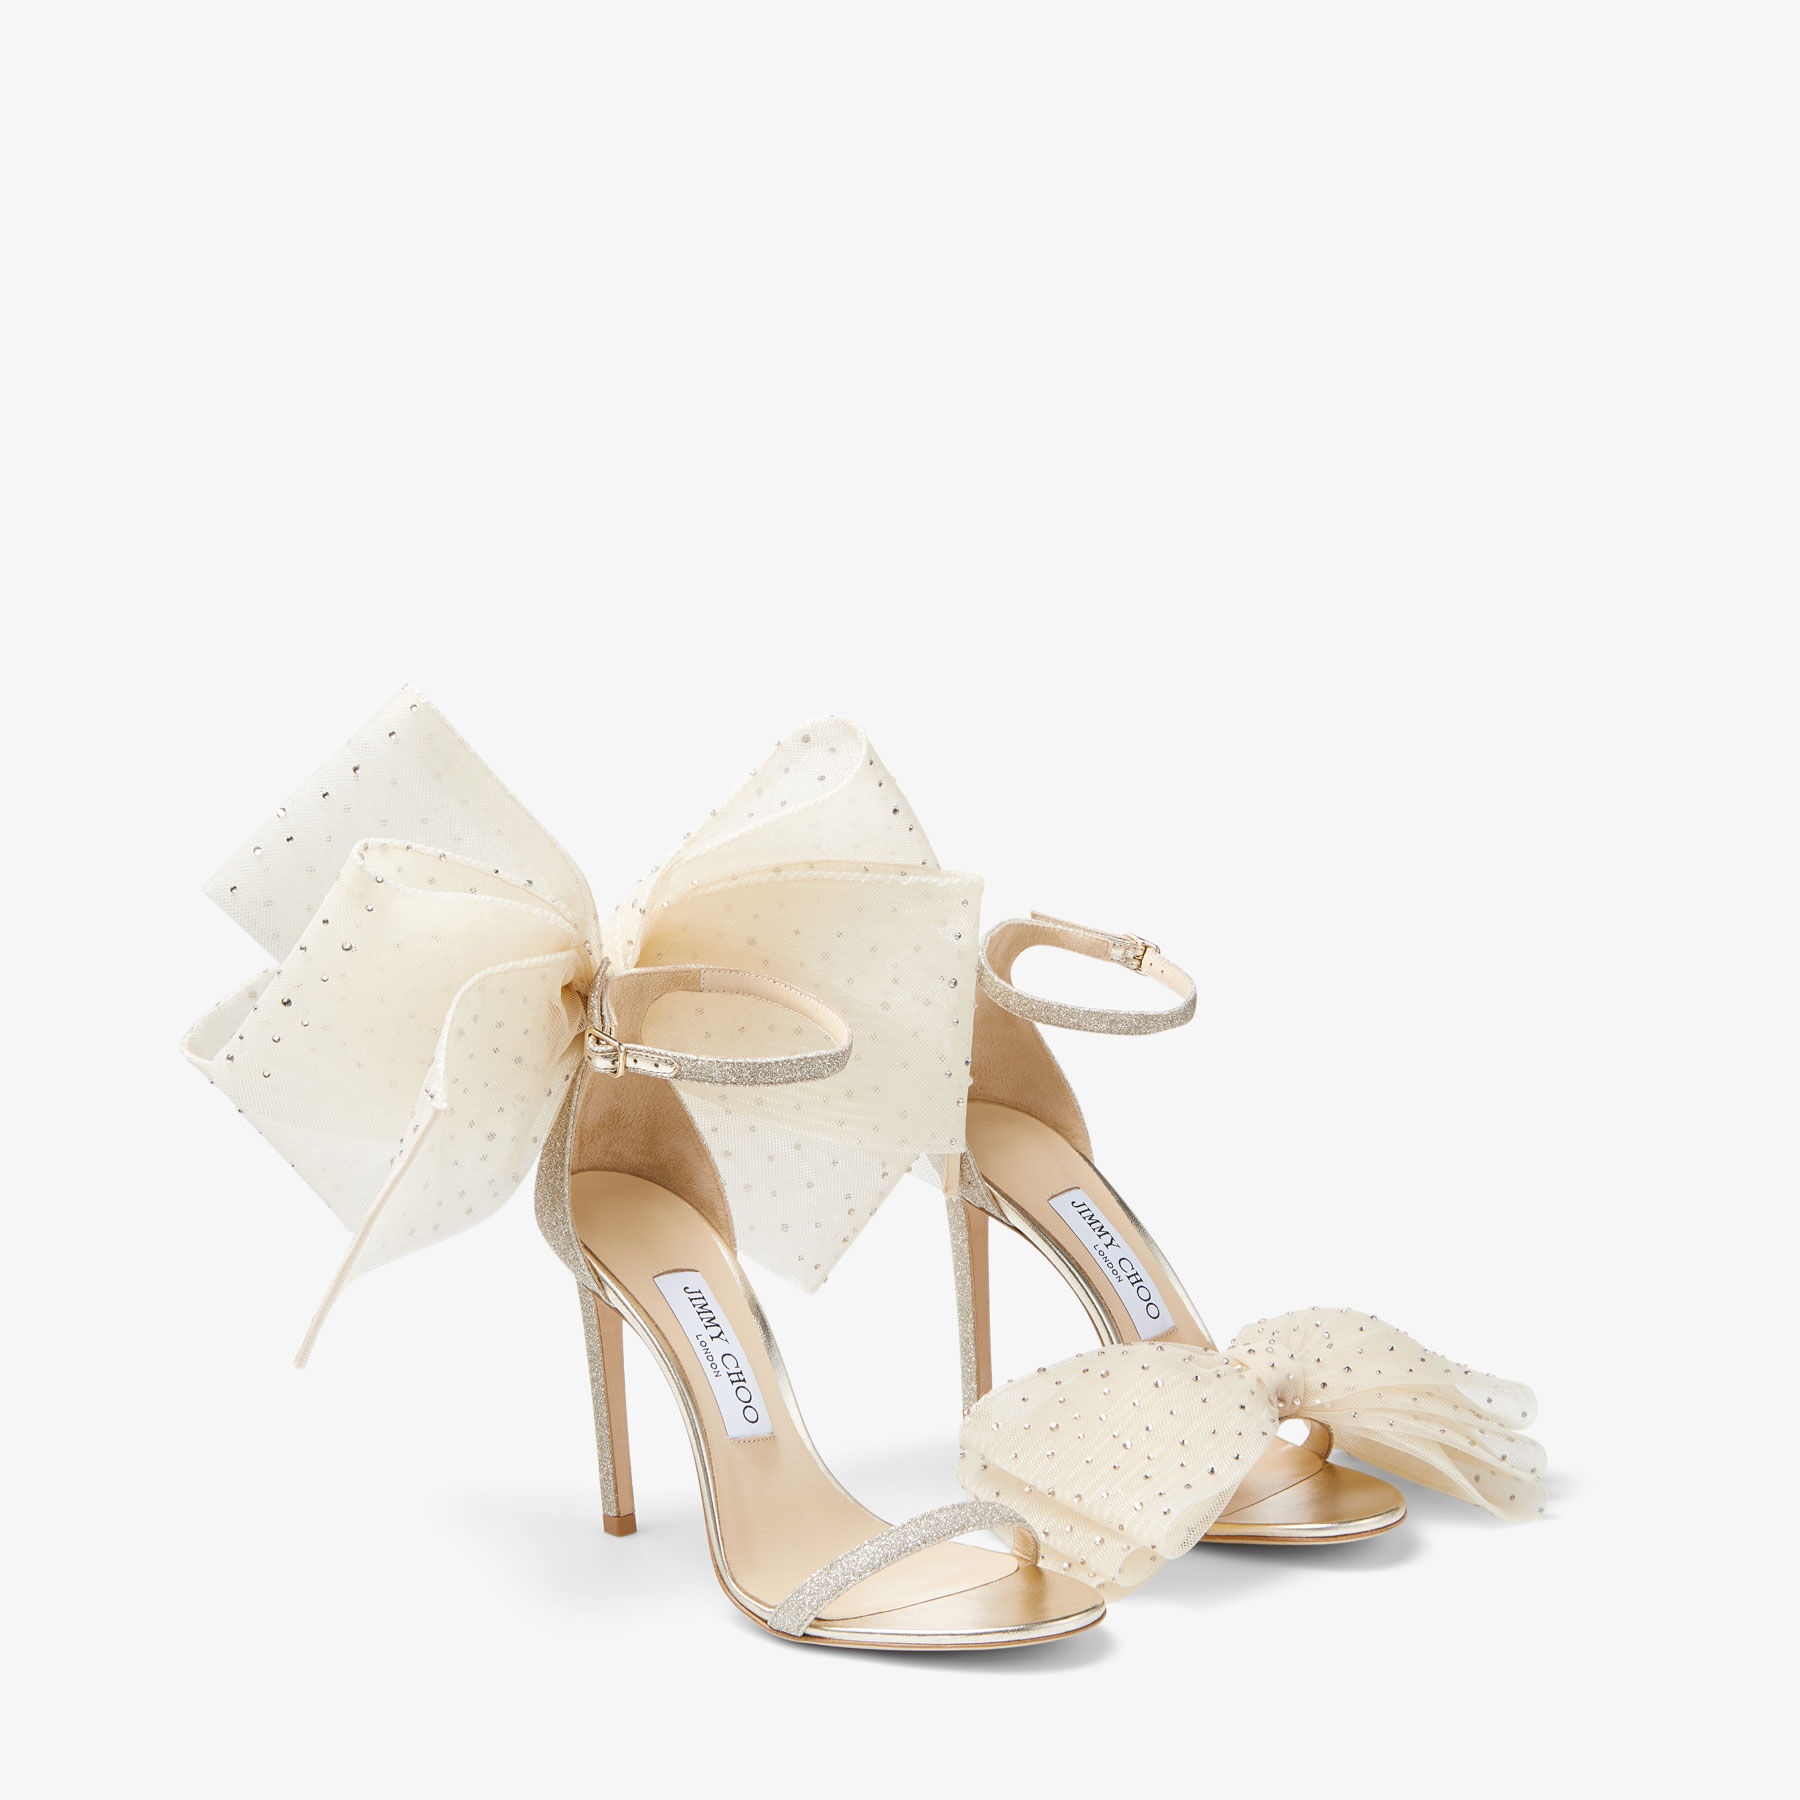 Aveline 100
Ivory Sandals with Asymmetric Crystal Hotfix Bows - 3